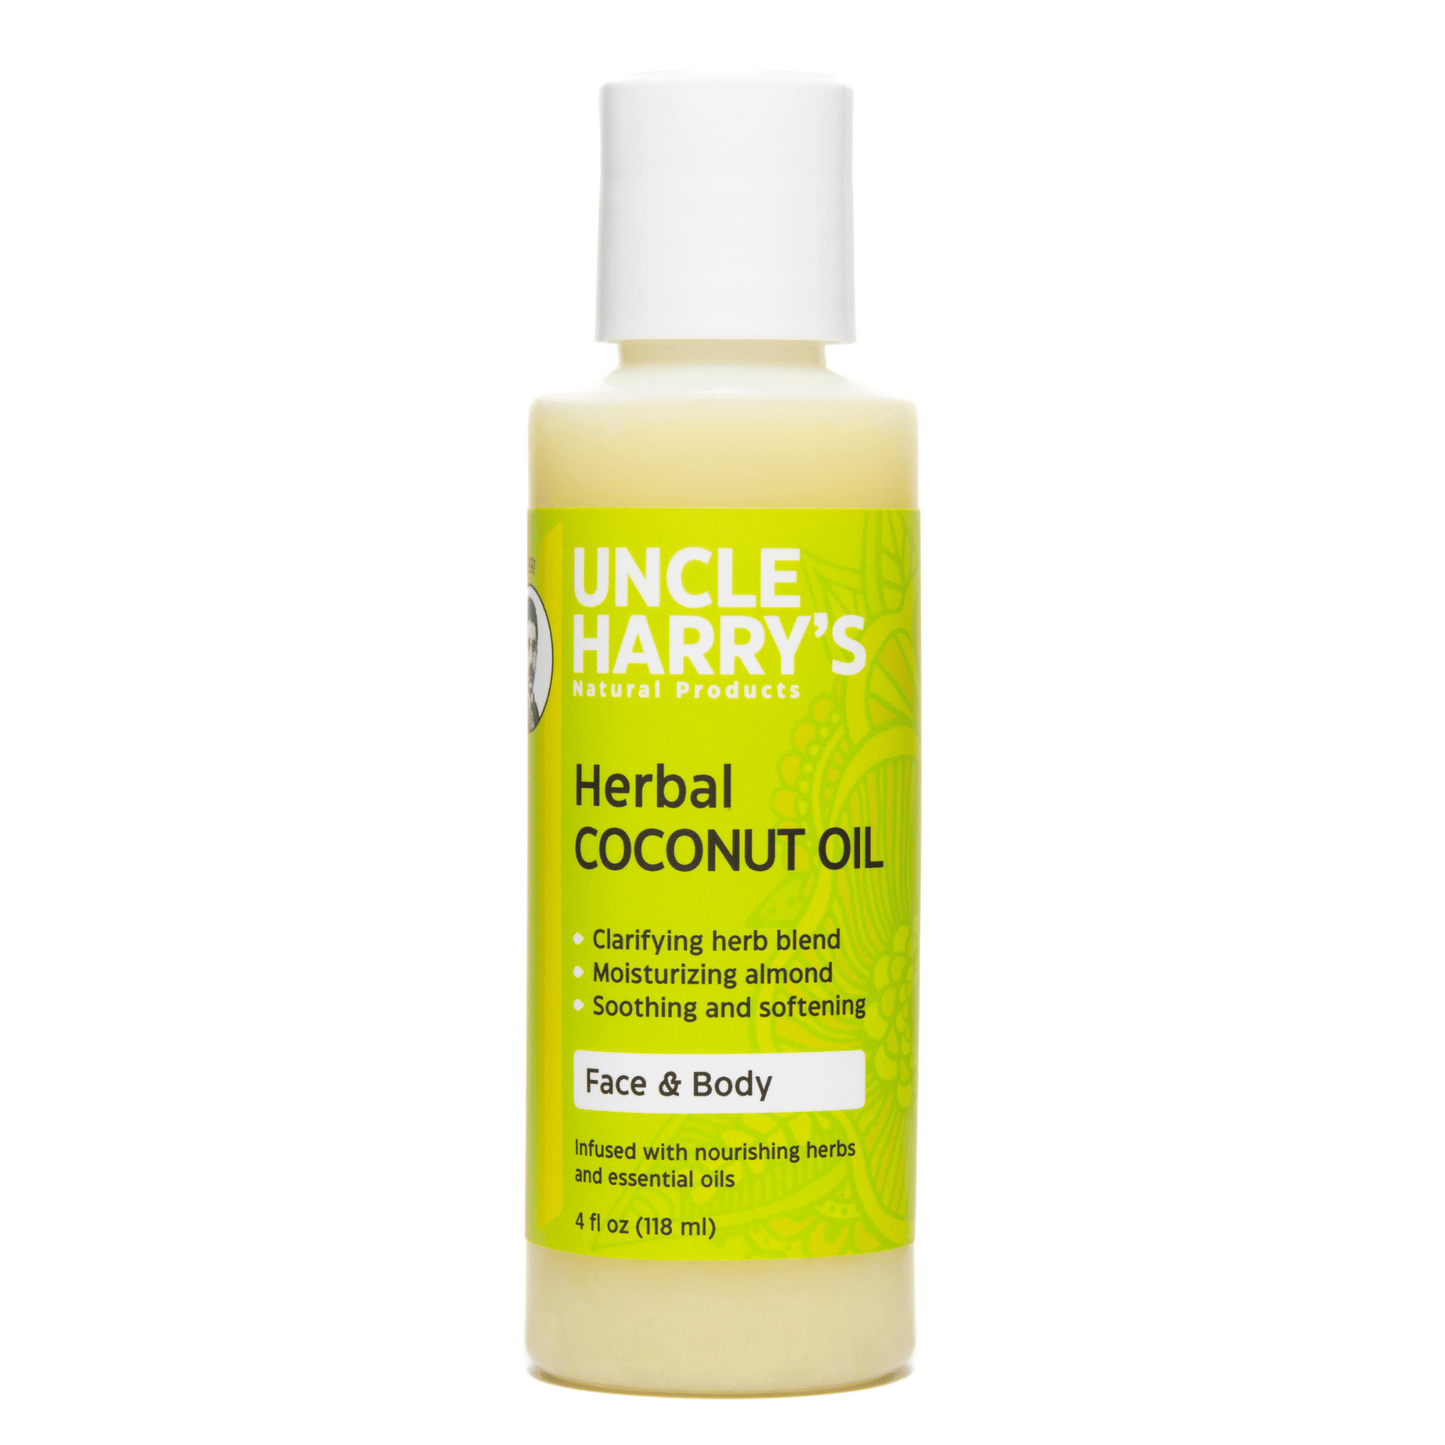 Primary Image of Herbal Coconut Oil for Face + Body